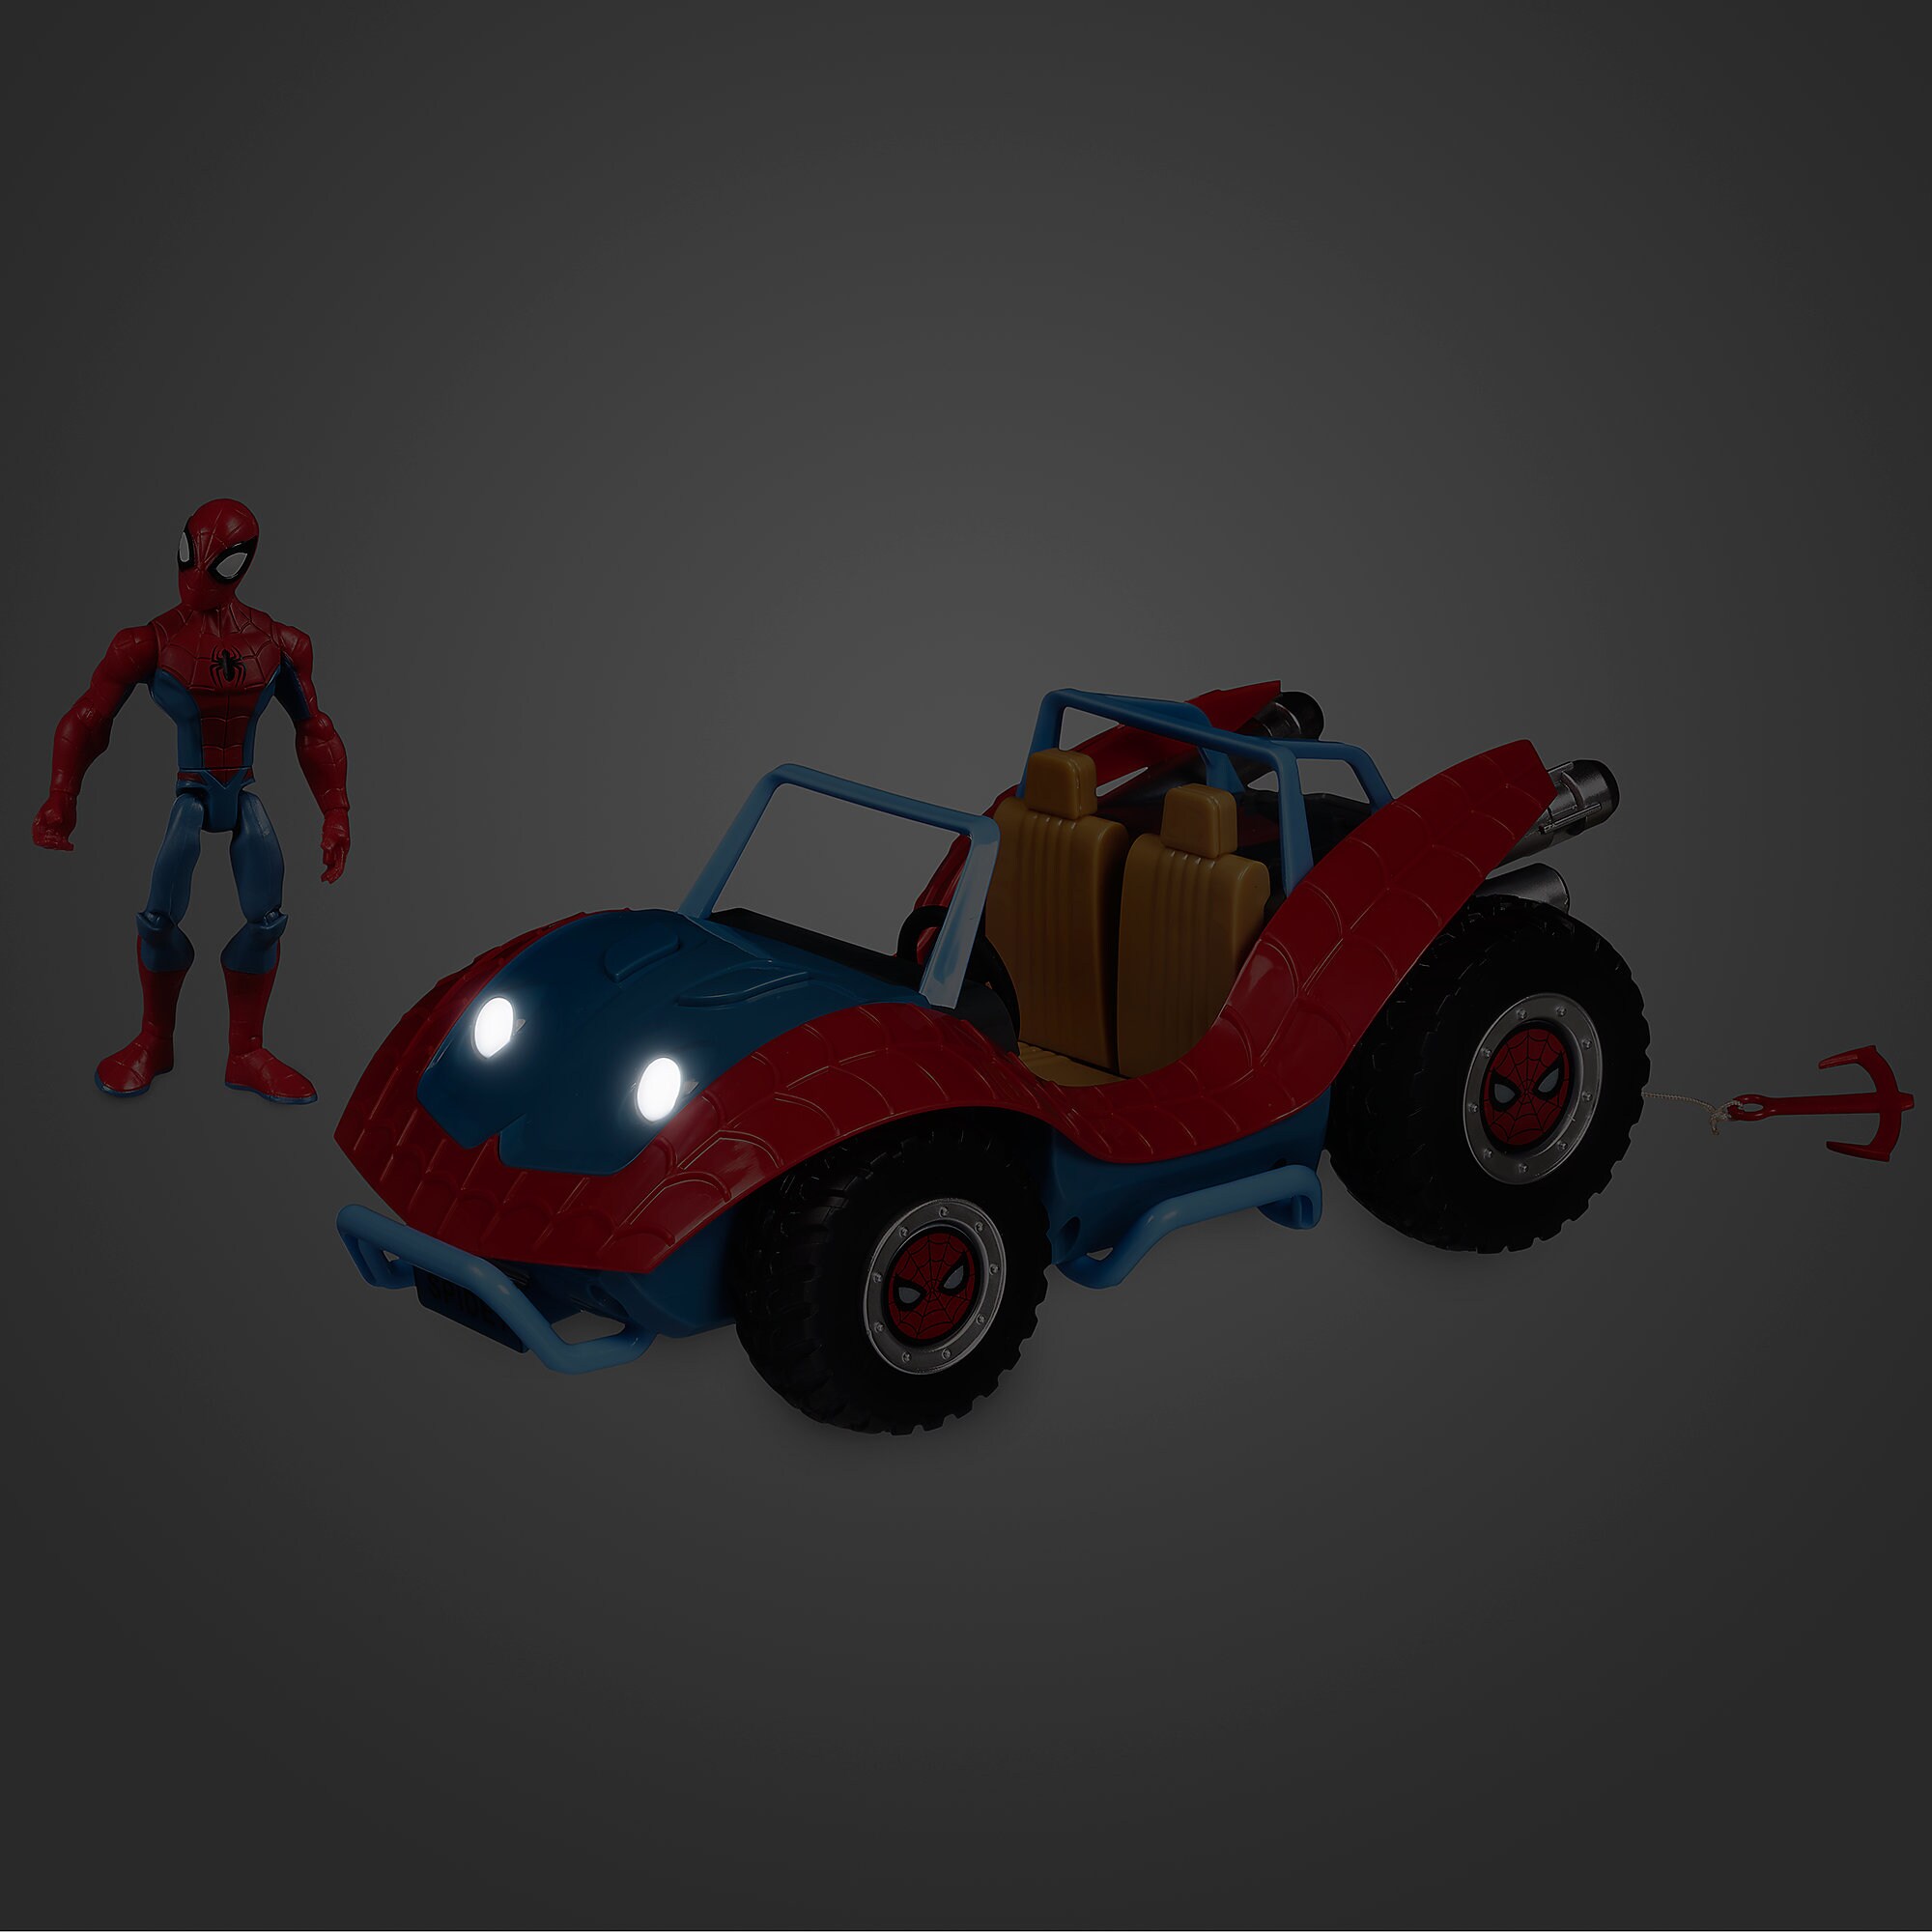 Spider-Man with Spider-Mobile Playset - Marvel Toybox